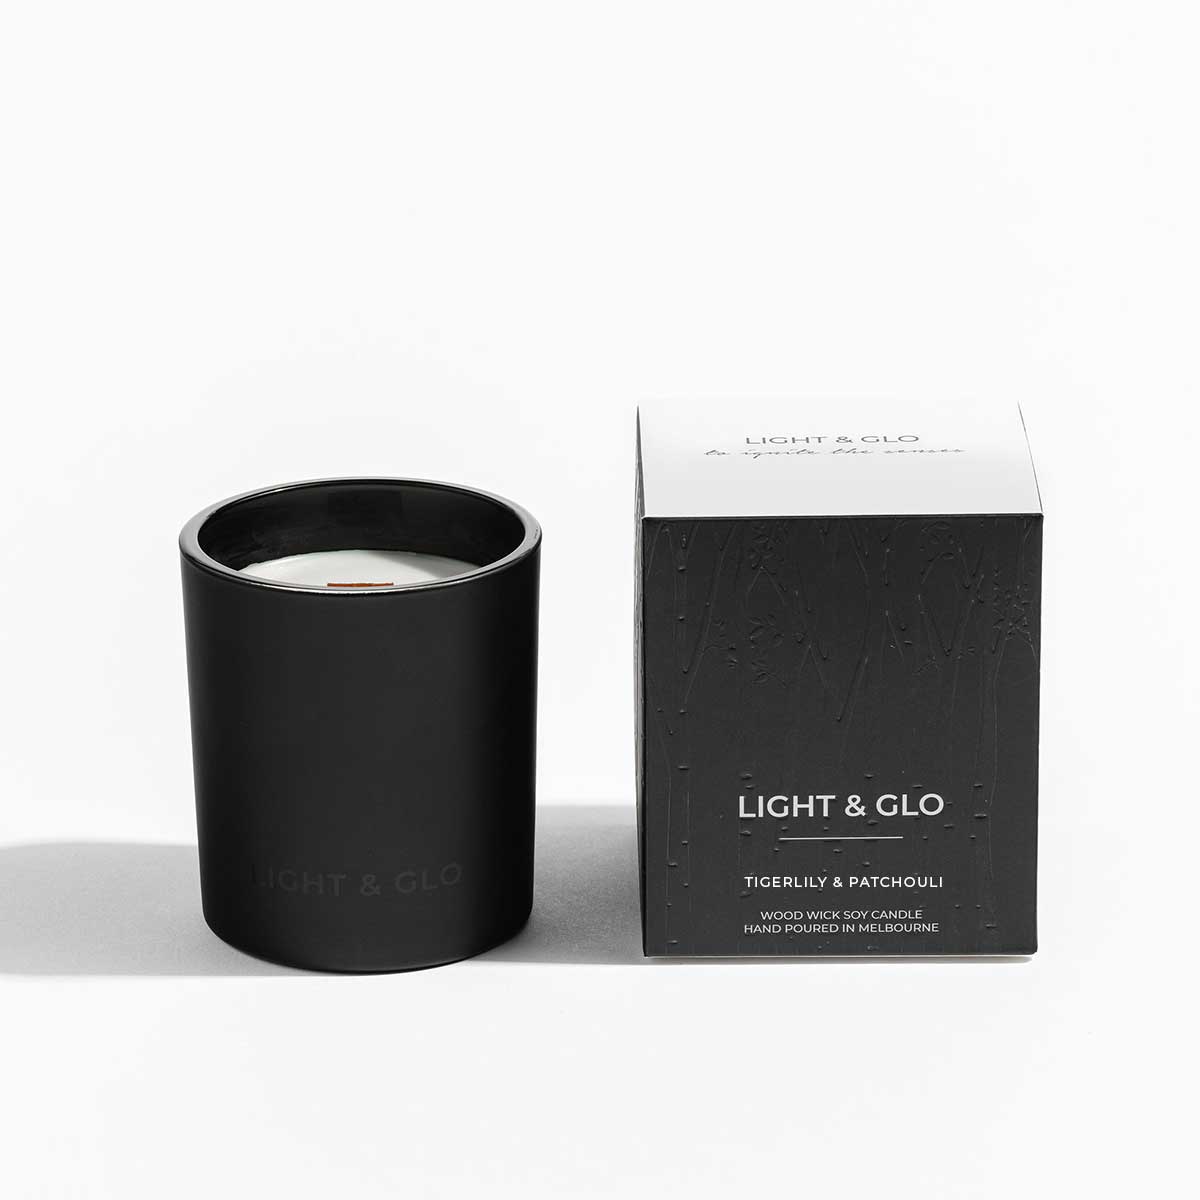 Tiger Lily &amp; Patchouli - Monochrome Large 300g Candle | Luxury Candles &amp; Home Fragrances by Light + Glo